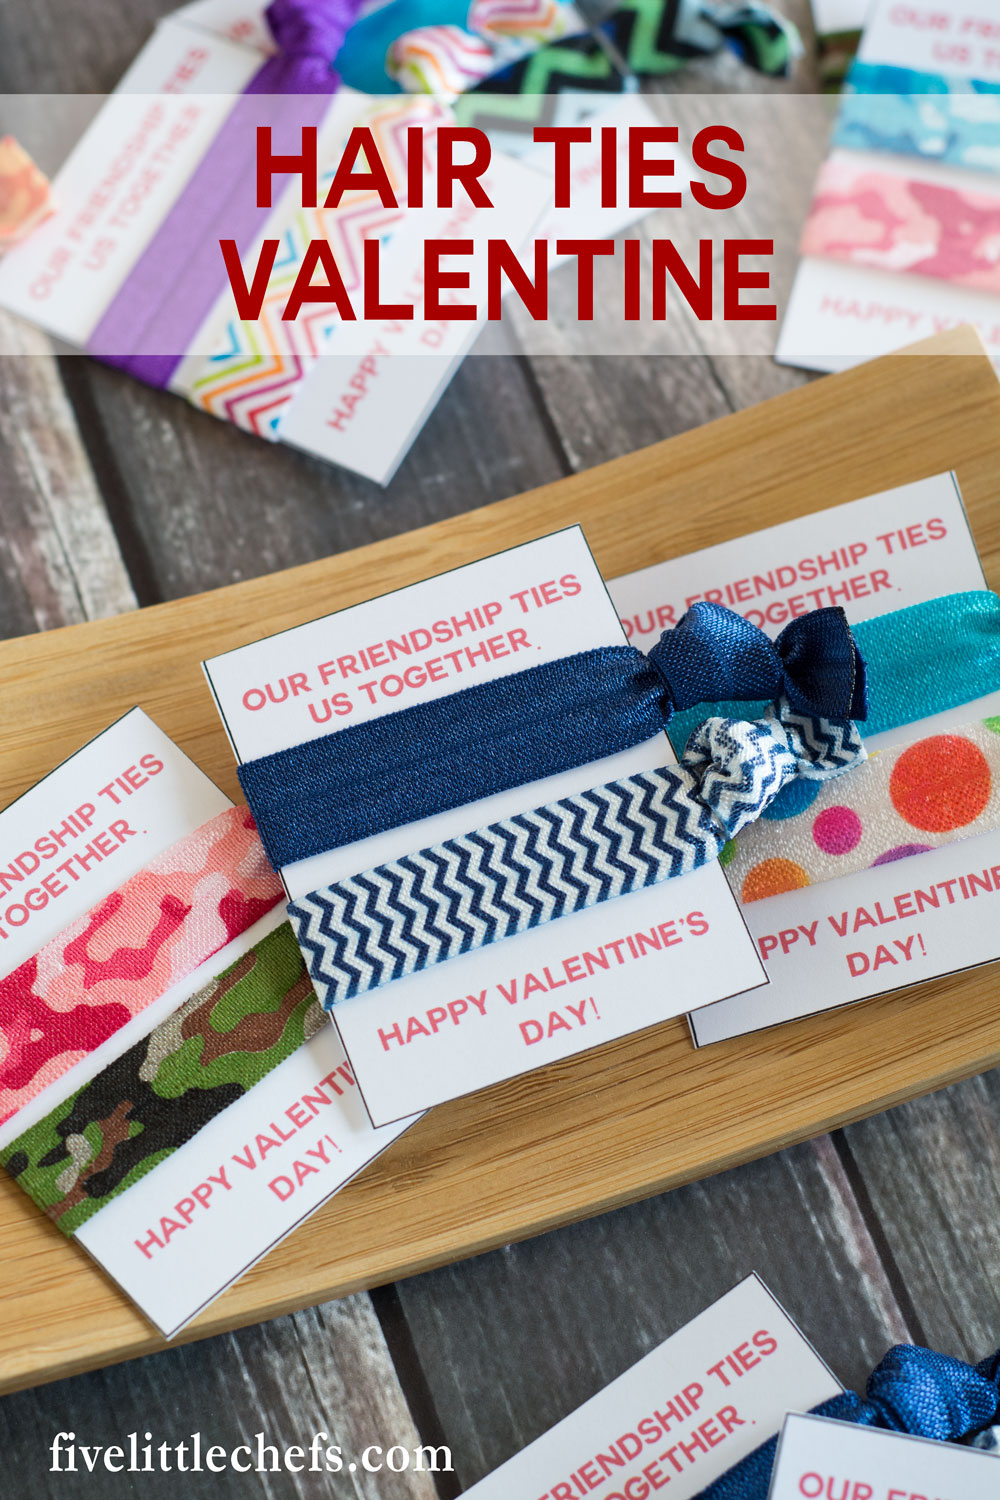 Hair ties classroom valentine ideas for kids are cute, cheap and easy. Use the printables then add a DIY no crease hair tie. A great valentine's day idea for friends and family. Works as a fun no candy option for school.